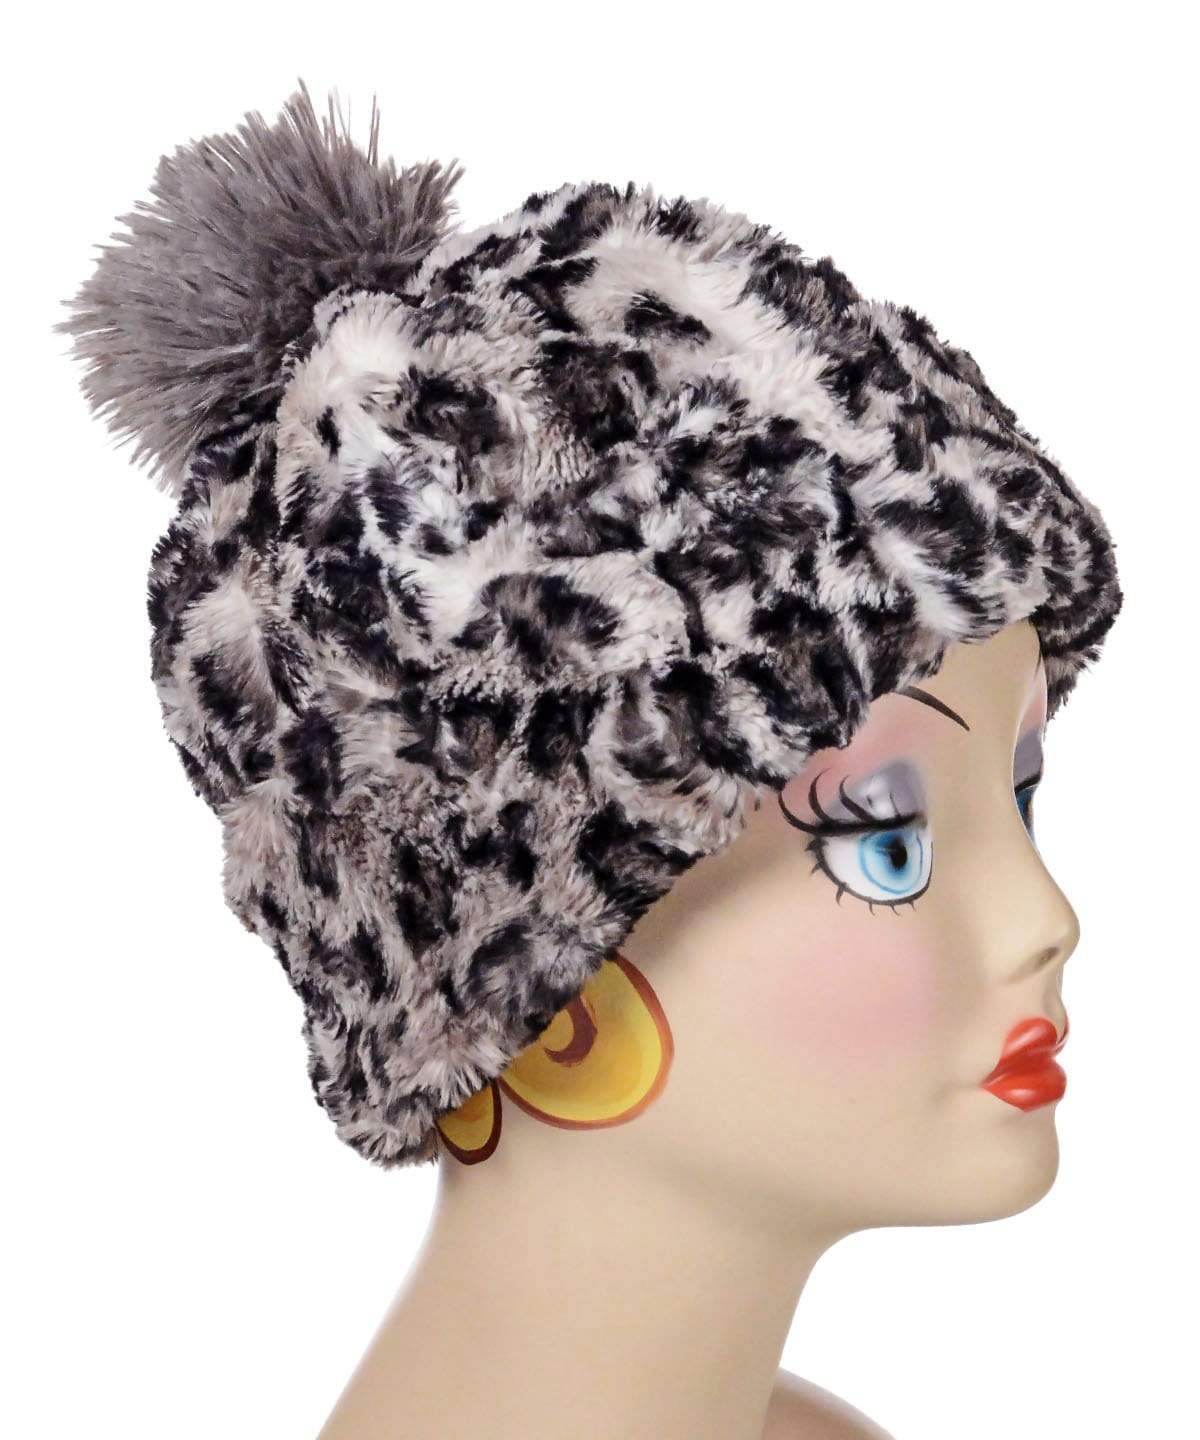 Women's Reversible Beanie with Pom Pom on mannequin | Savannah Cat Faux Fur with Cuddly Black | Handmade USA by Pandemonium Seattle